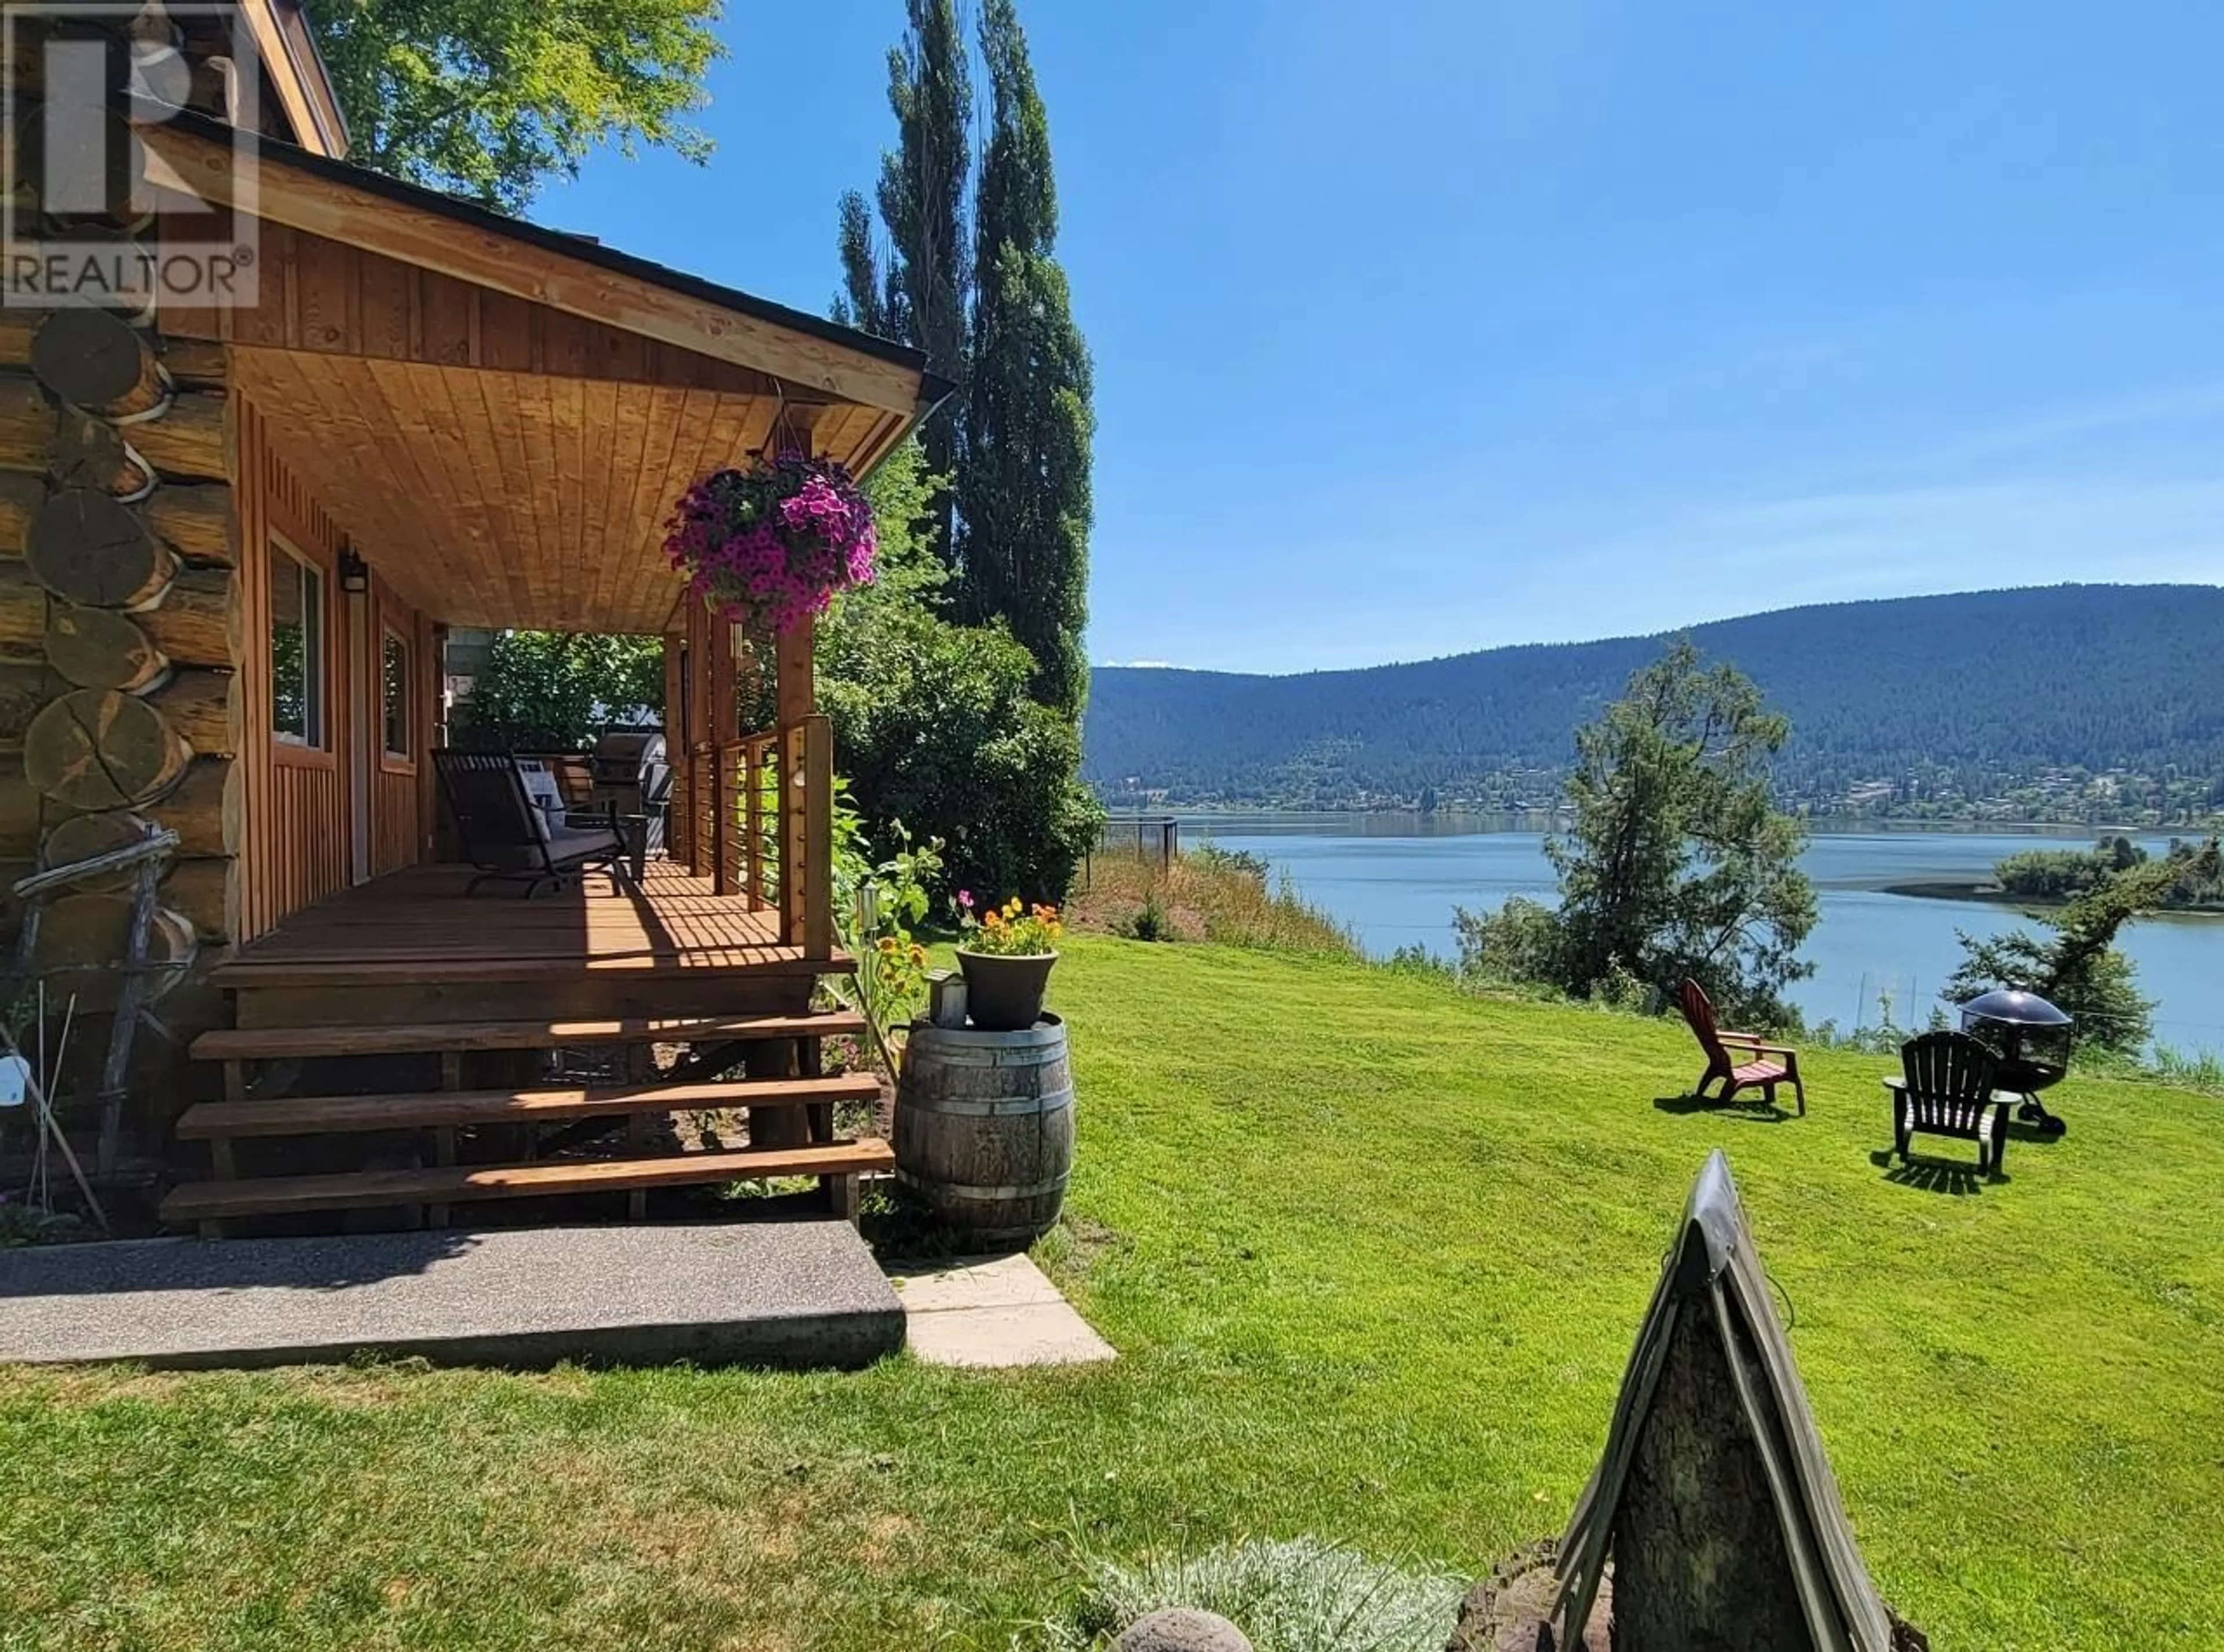 Cottage for 1513 S CARIBOO 97 HIGHWAY, Williams Lake British Columbia V2G2W3